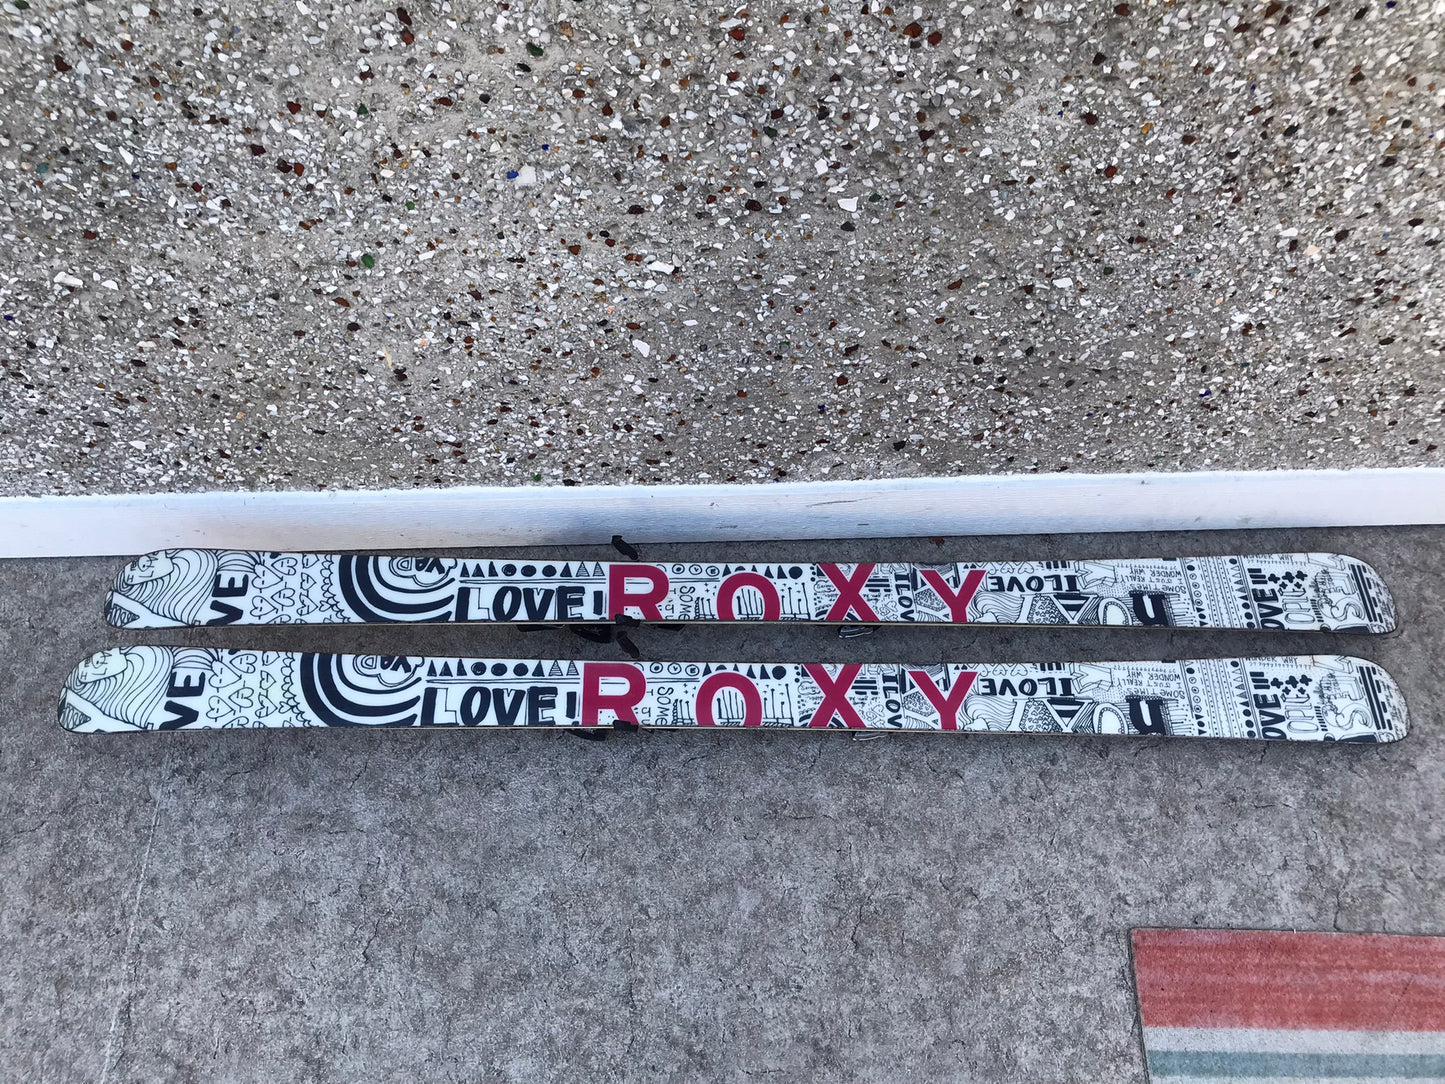 Ski 170 Roxy Luv Twin Tip Black White Pink  Parabolic with Bindings Excellent